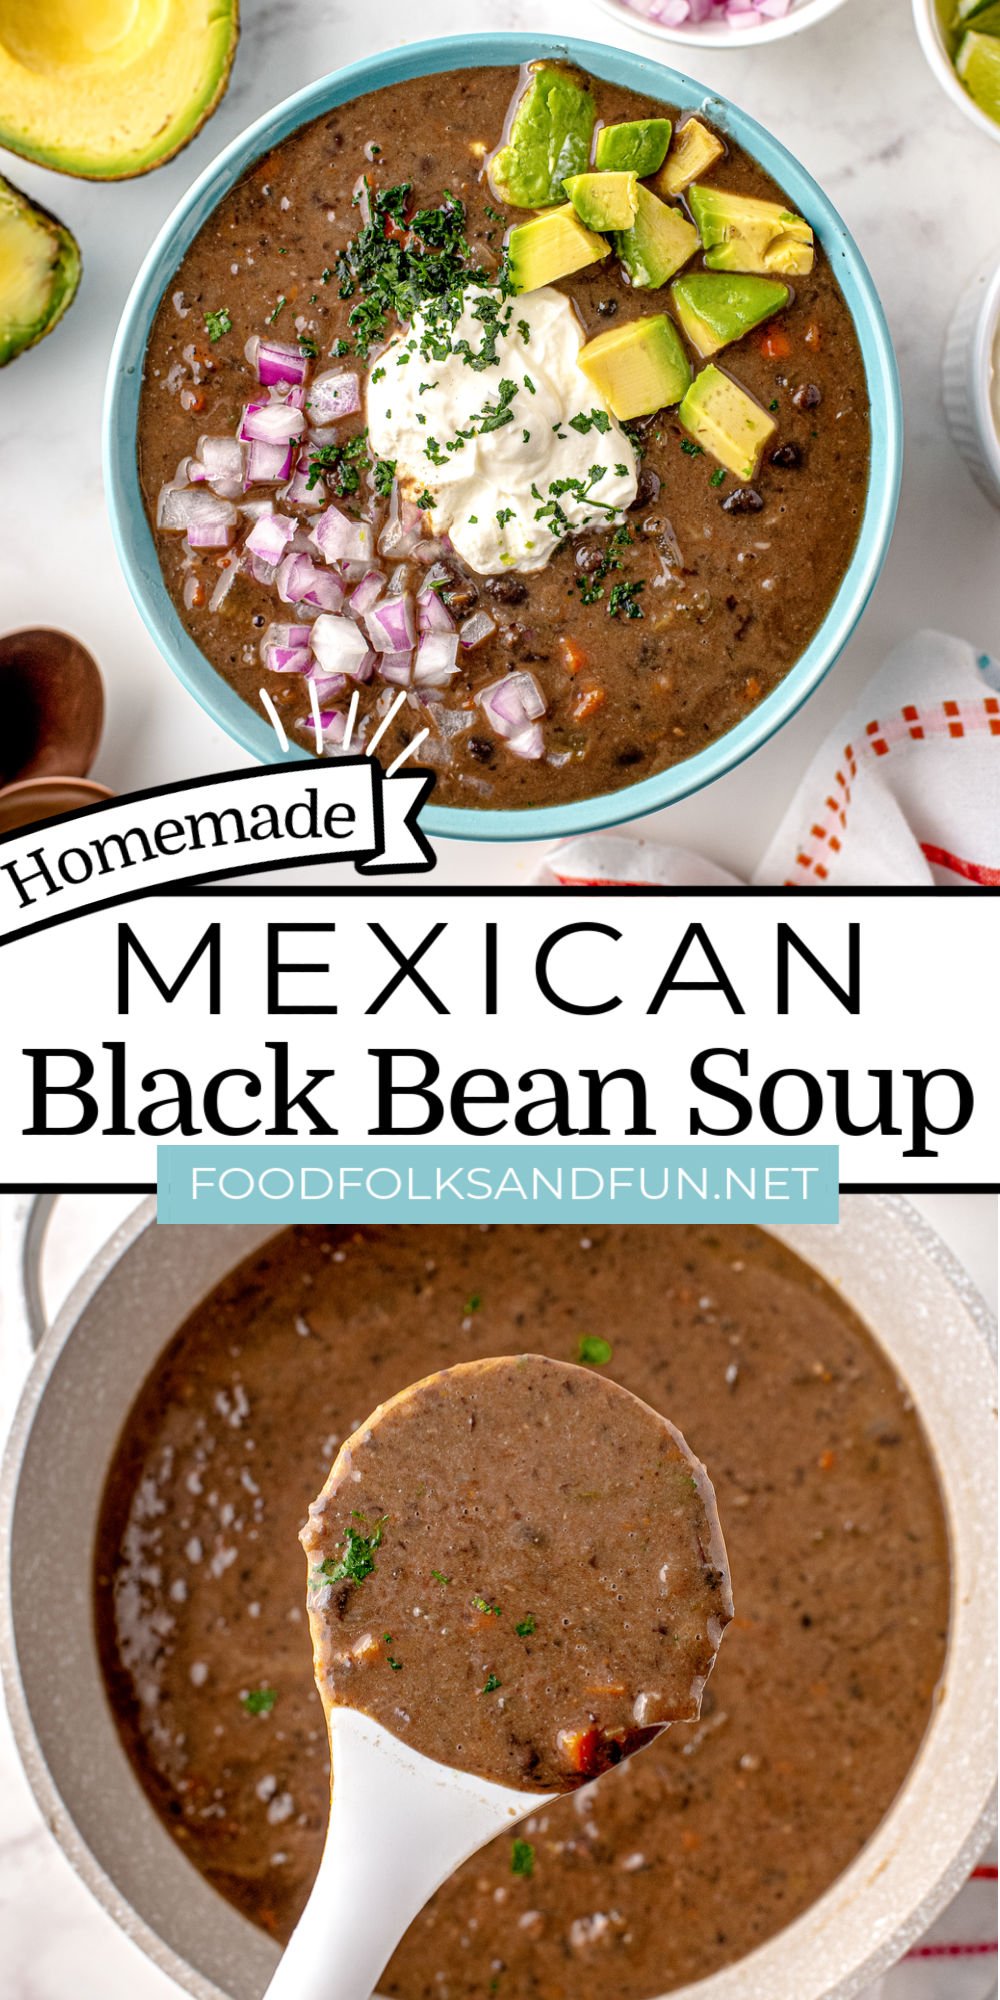 This is the best homemade, from scratch Black Bean Soup recipe out there! It is even better than anything you’ll have at a restaurant! via @foodfolksandfun